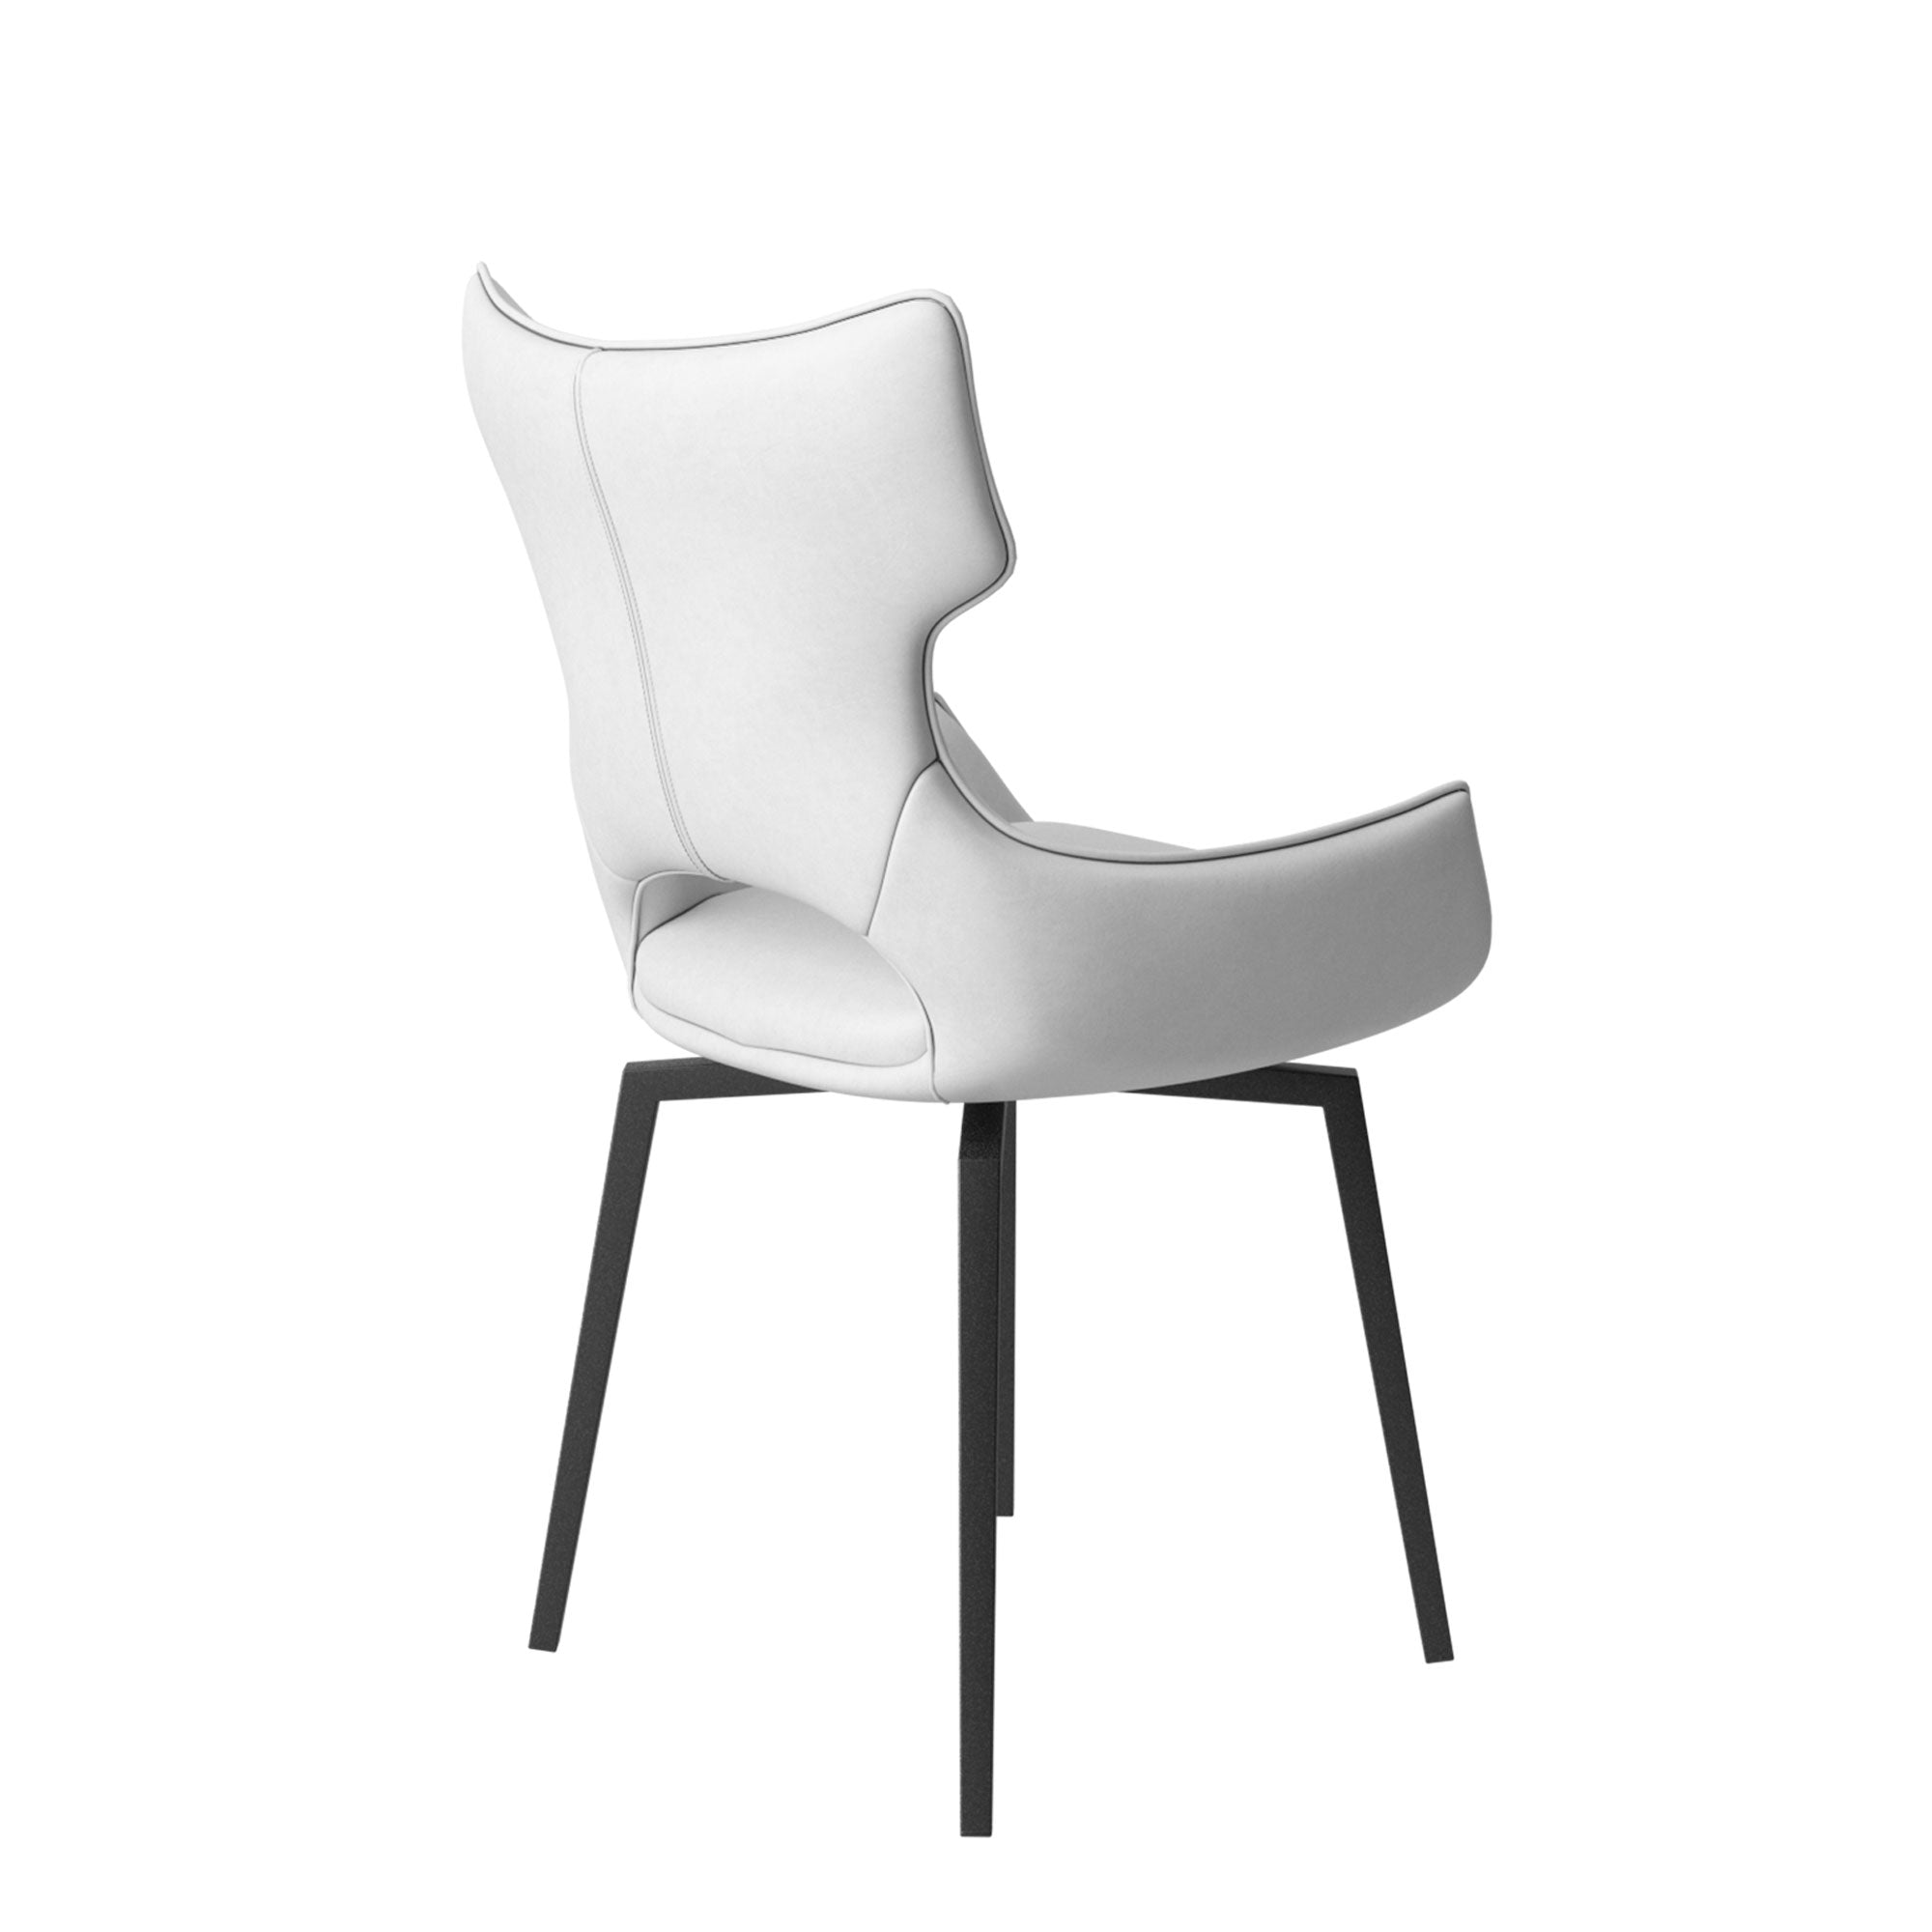 Luca - Swivel Dining Chair In White PU